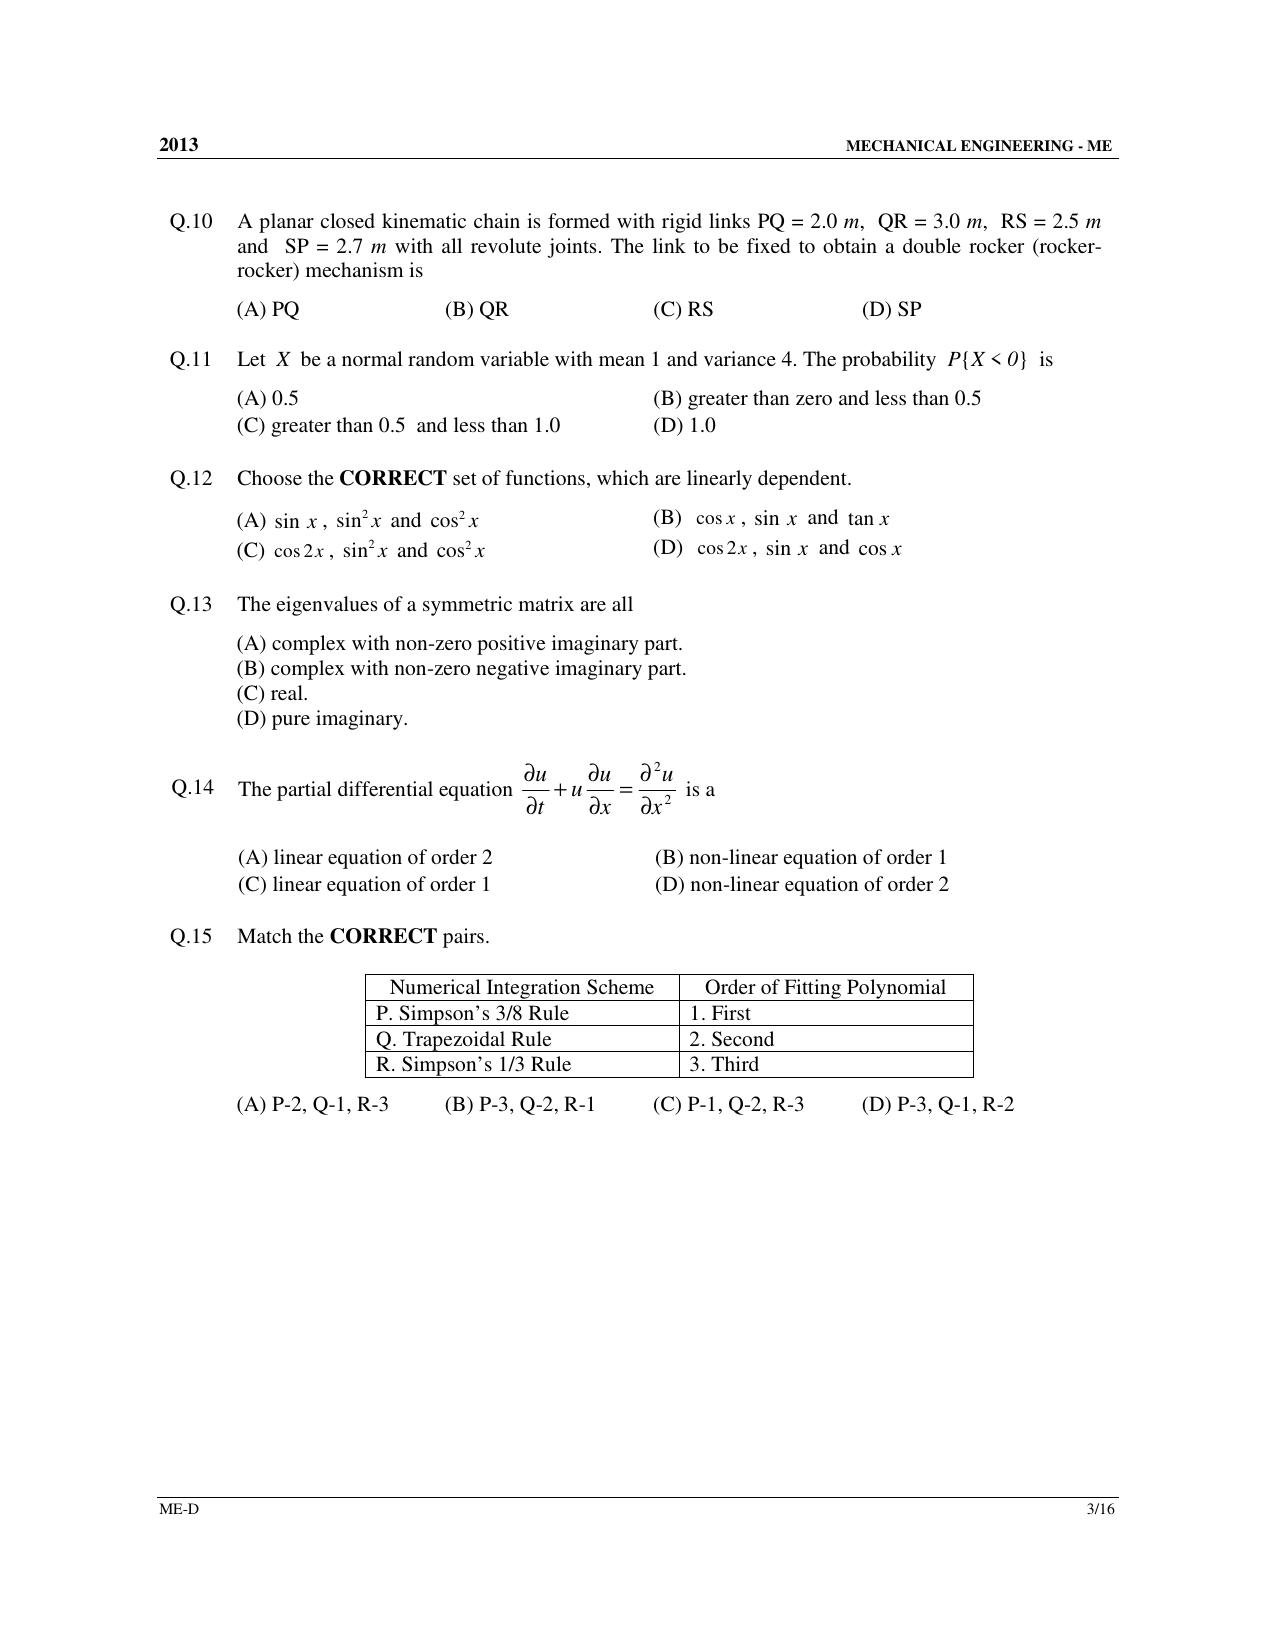 GATE 2013 Mechanical Engineering (ME) Question Paper with Answer Key - Page 46